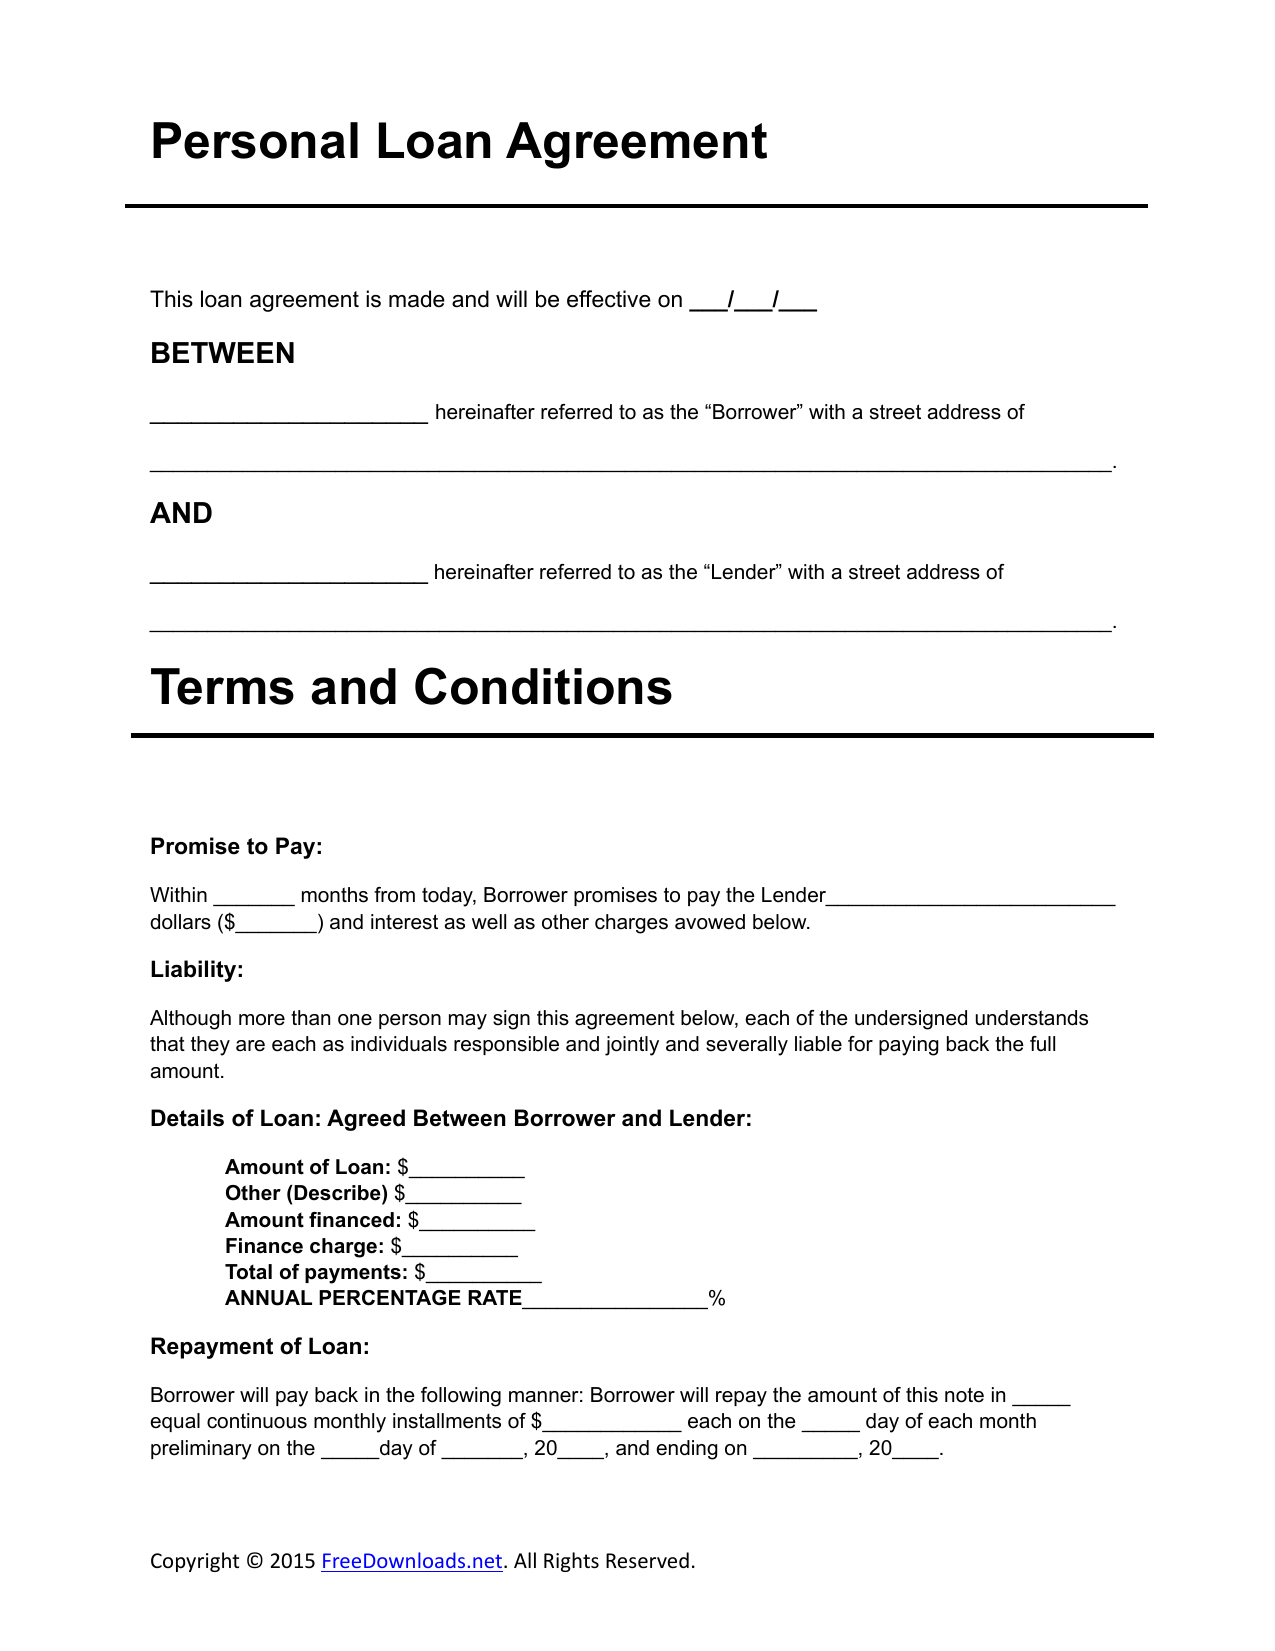 Personal Agreement Template Download Personal Loan Agreement Template Pdf Rtf Word